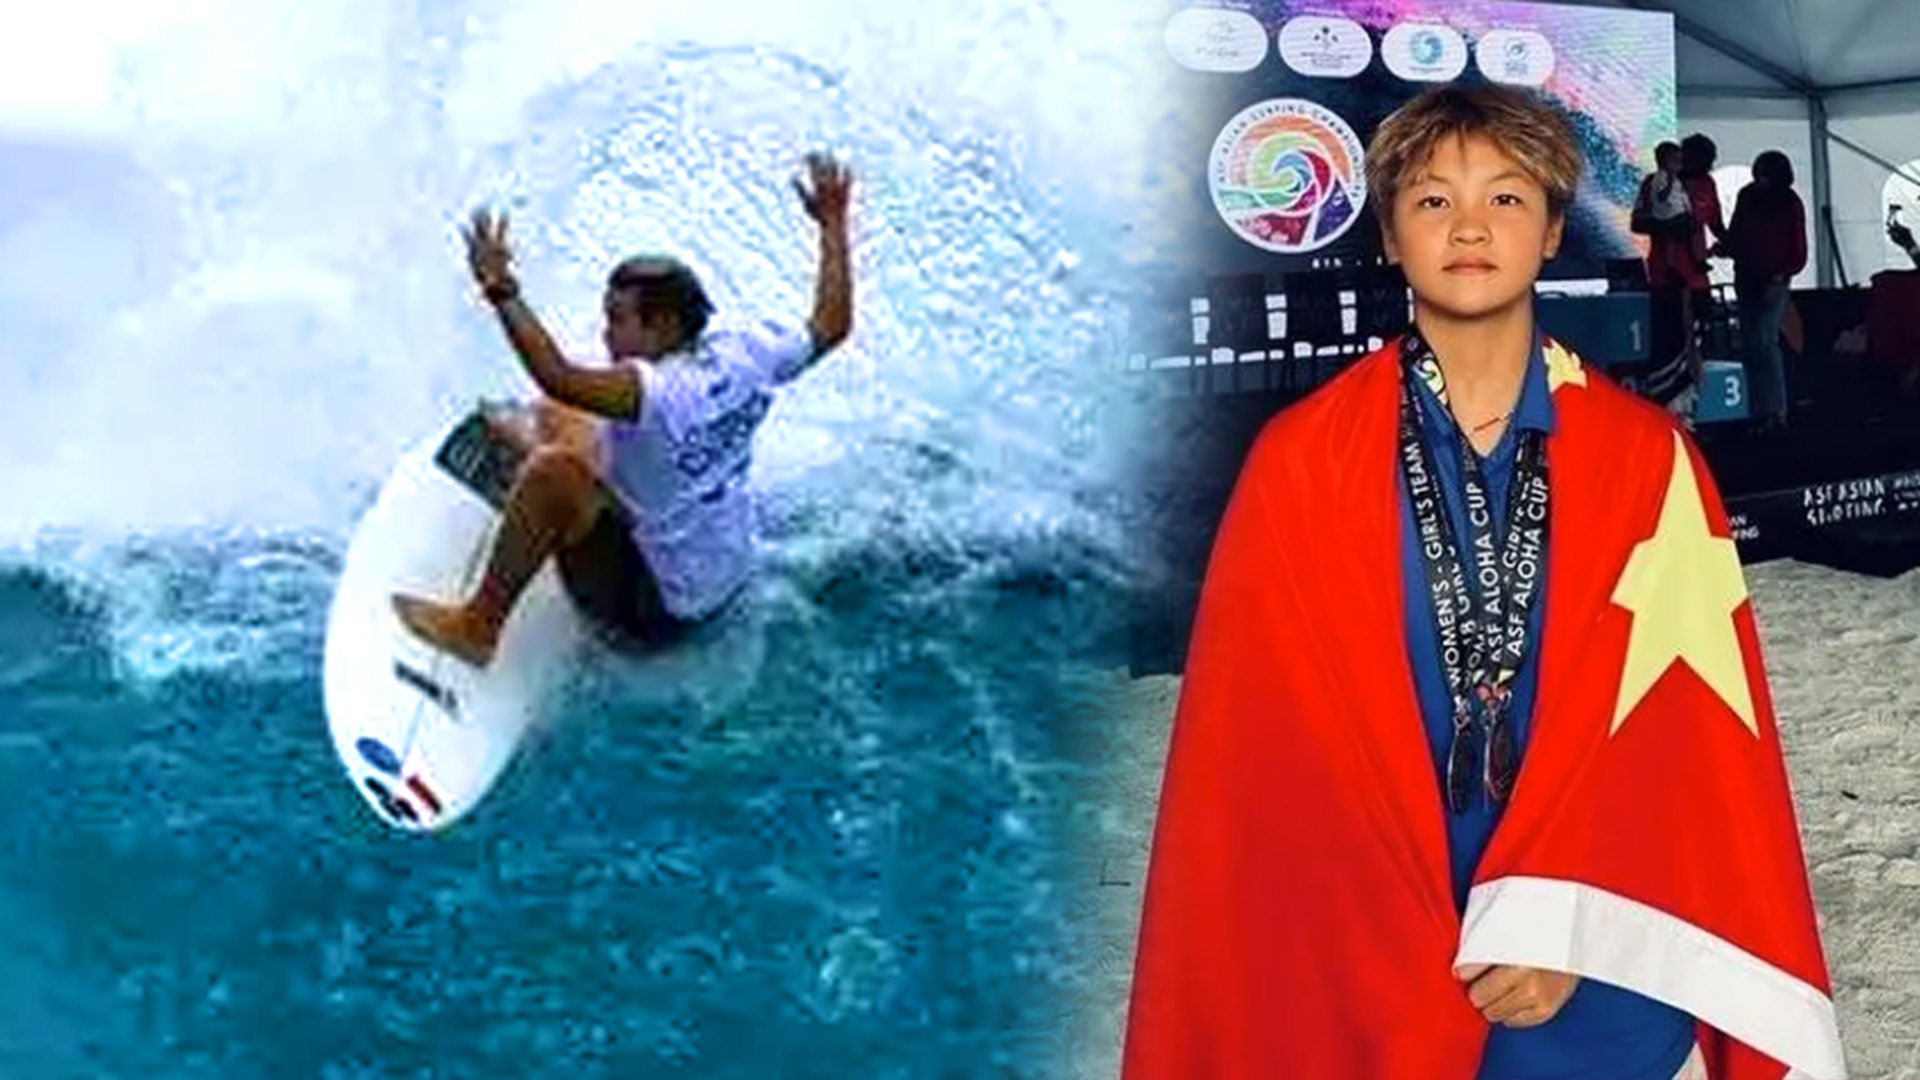 From landlocked China farm girl to surfing at the 2024 Paris Olympic Games,  who is the phenomenon that is Yang Siqi? Photo: SCMP composite/Baidu/Weibo